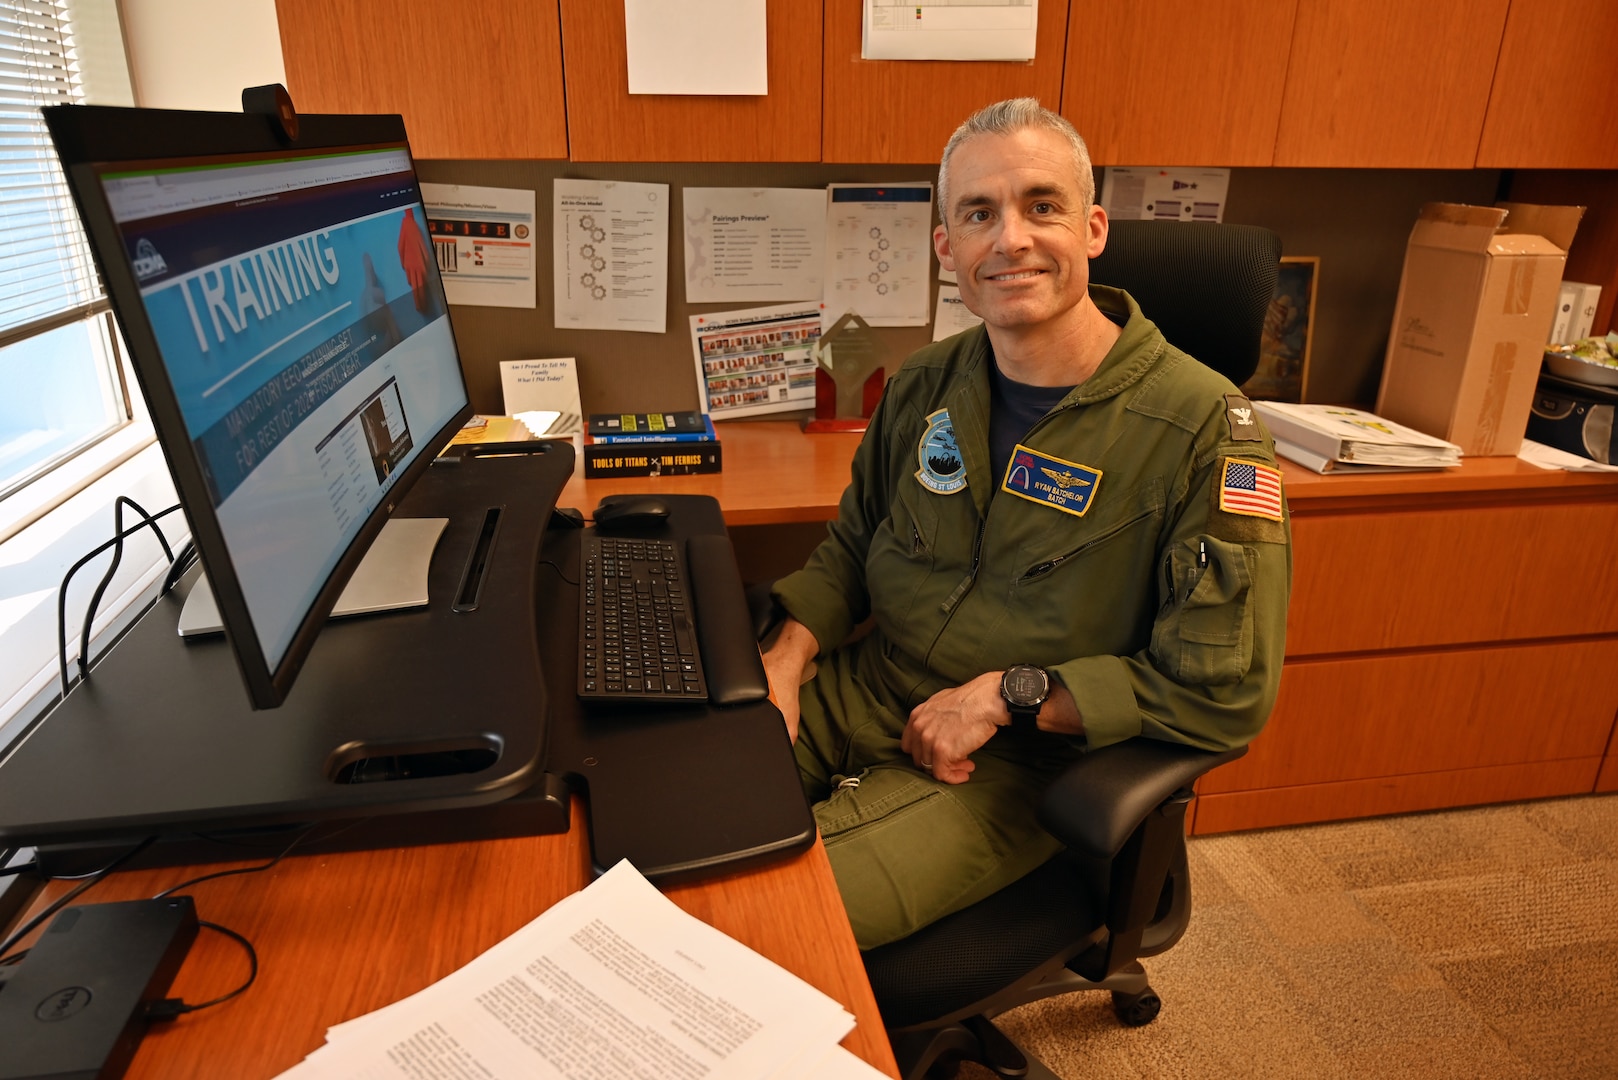 A smiling man wearing a flight suit sits at his desk near a computer